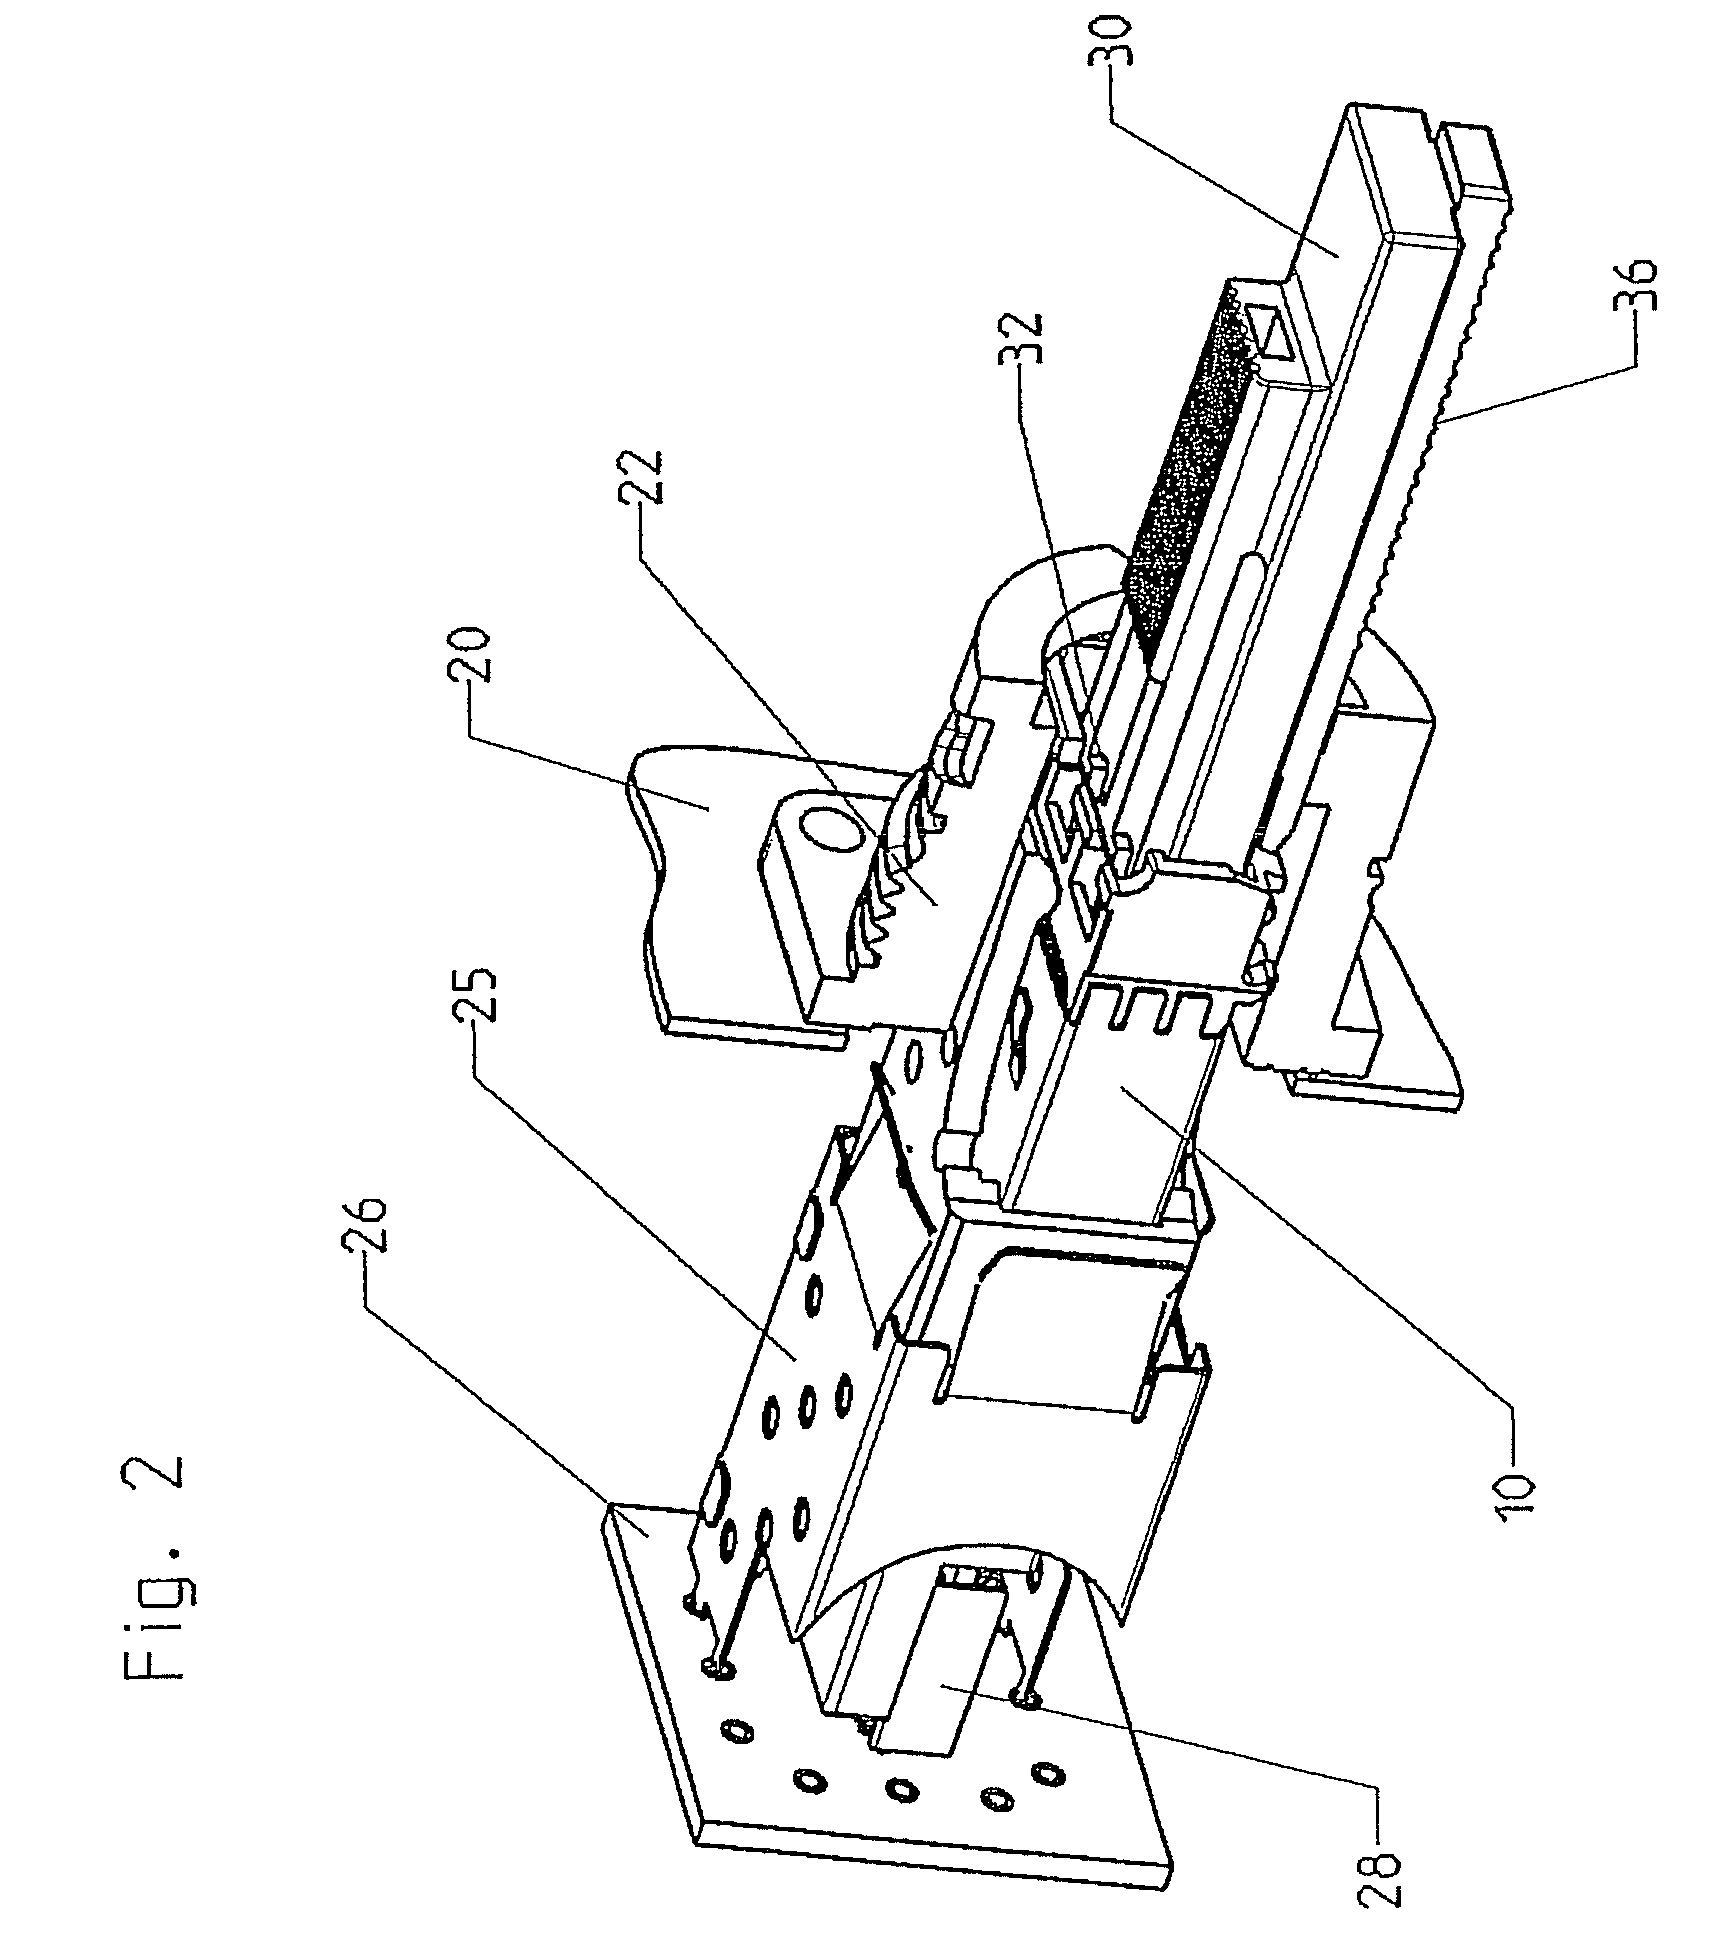 Device for releasing a transceiver fixed in a housing via a connection from the housing